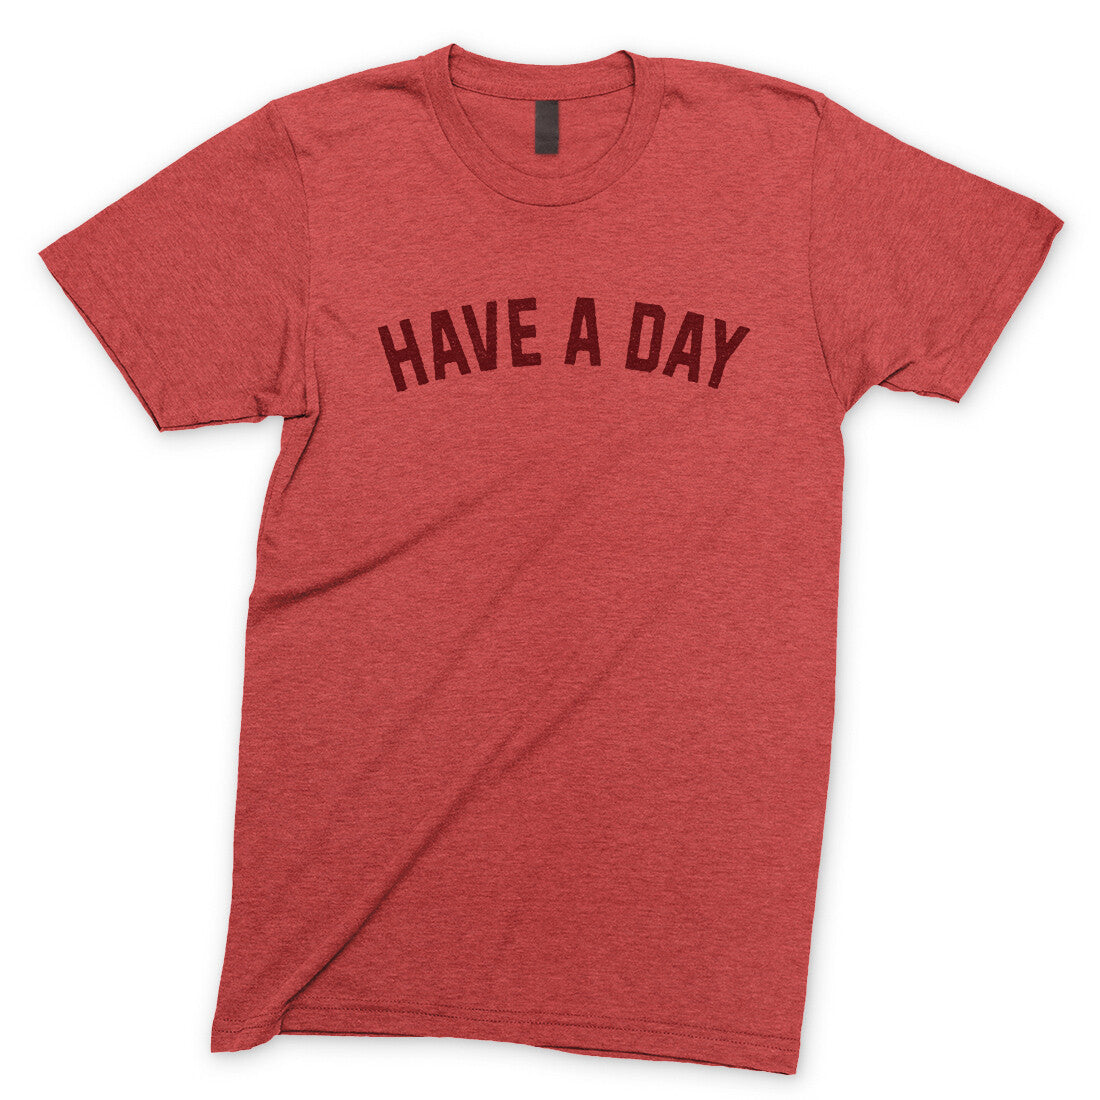 Have a Day in Heather Red Color